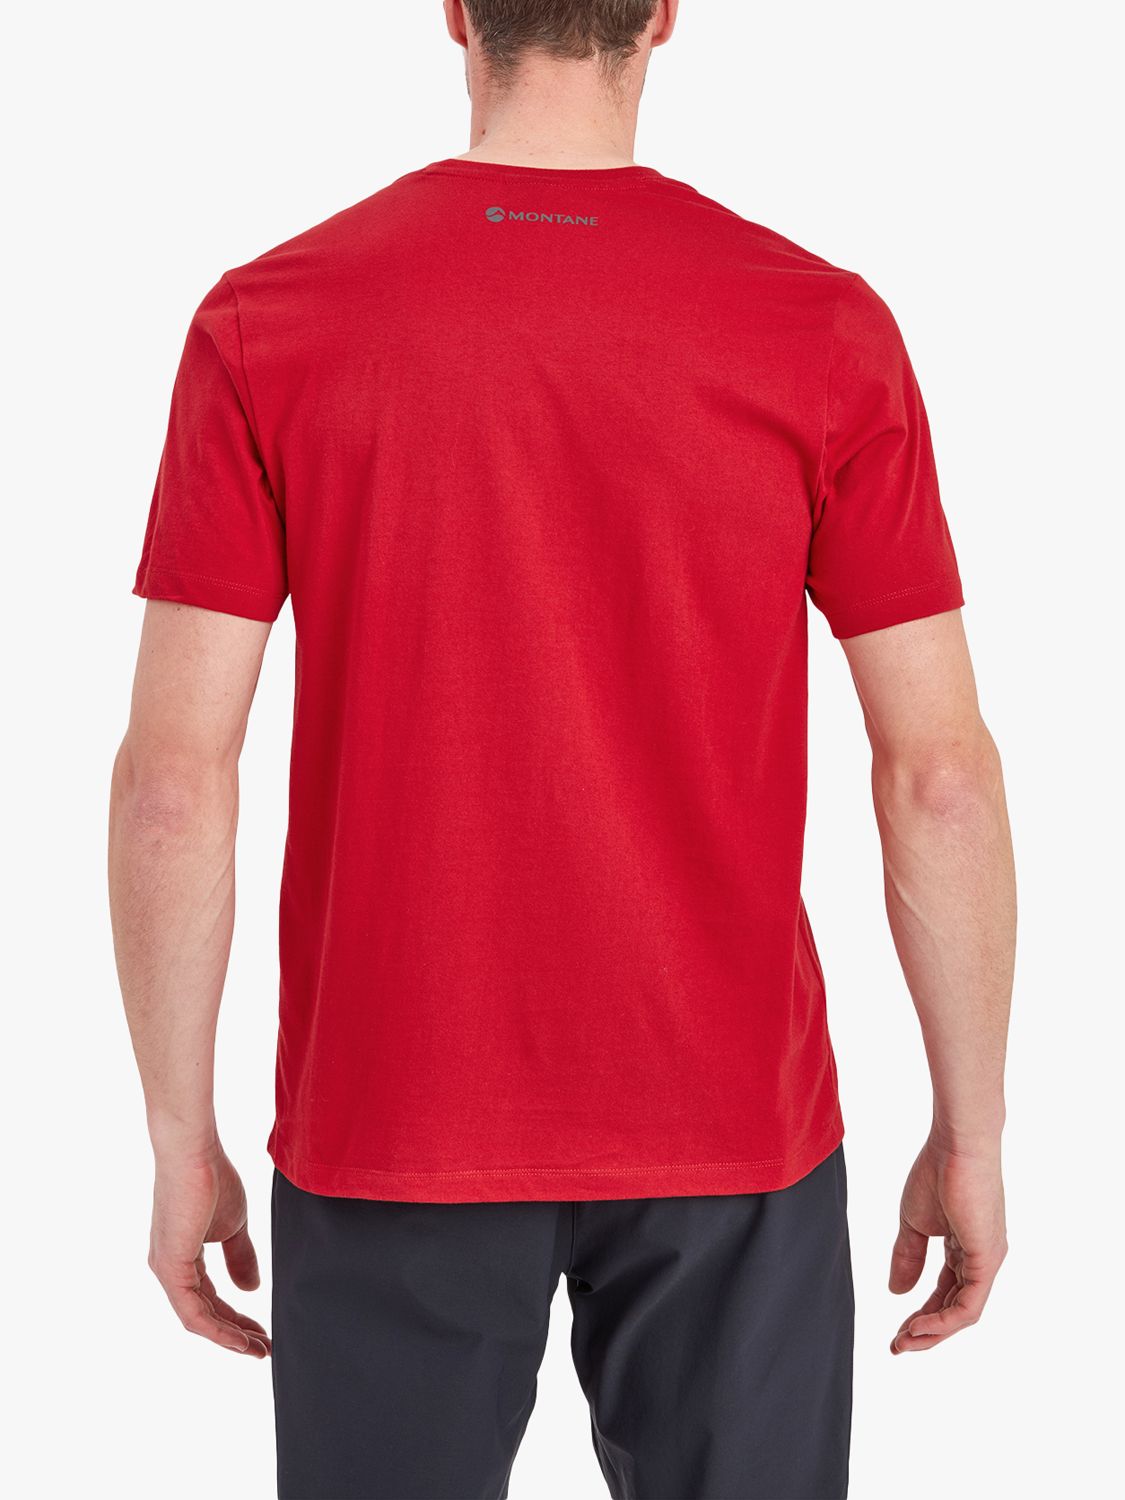 Buy Montane Forest Organic Cotton Top Online at johnlewis.com